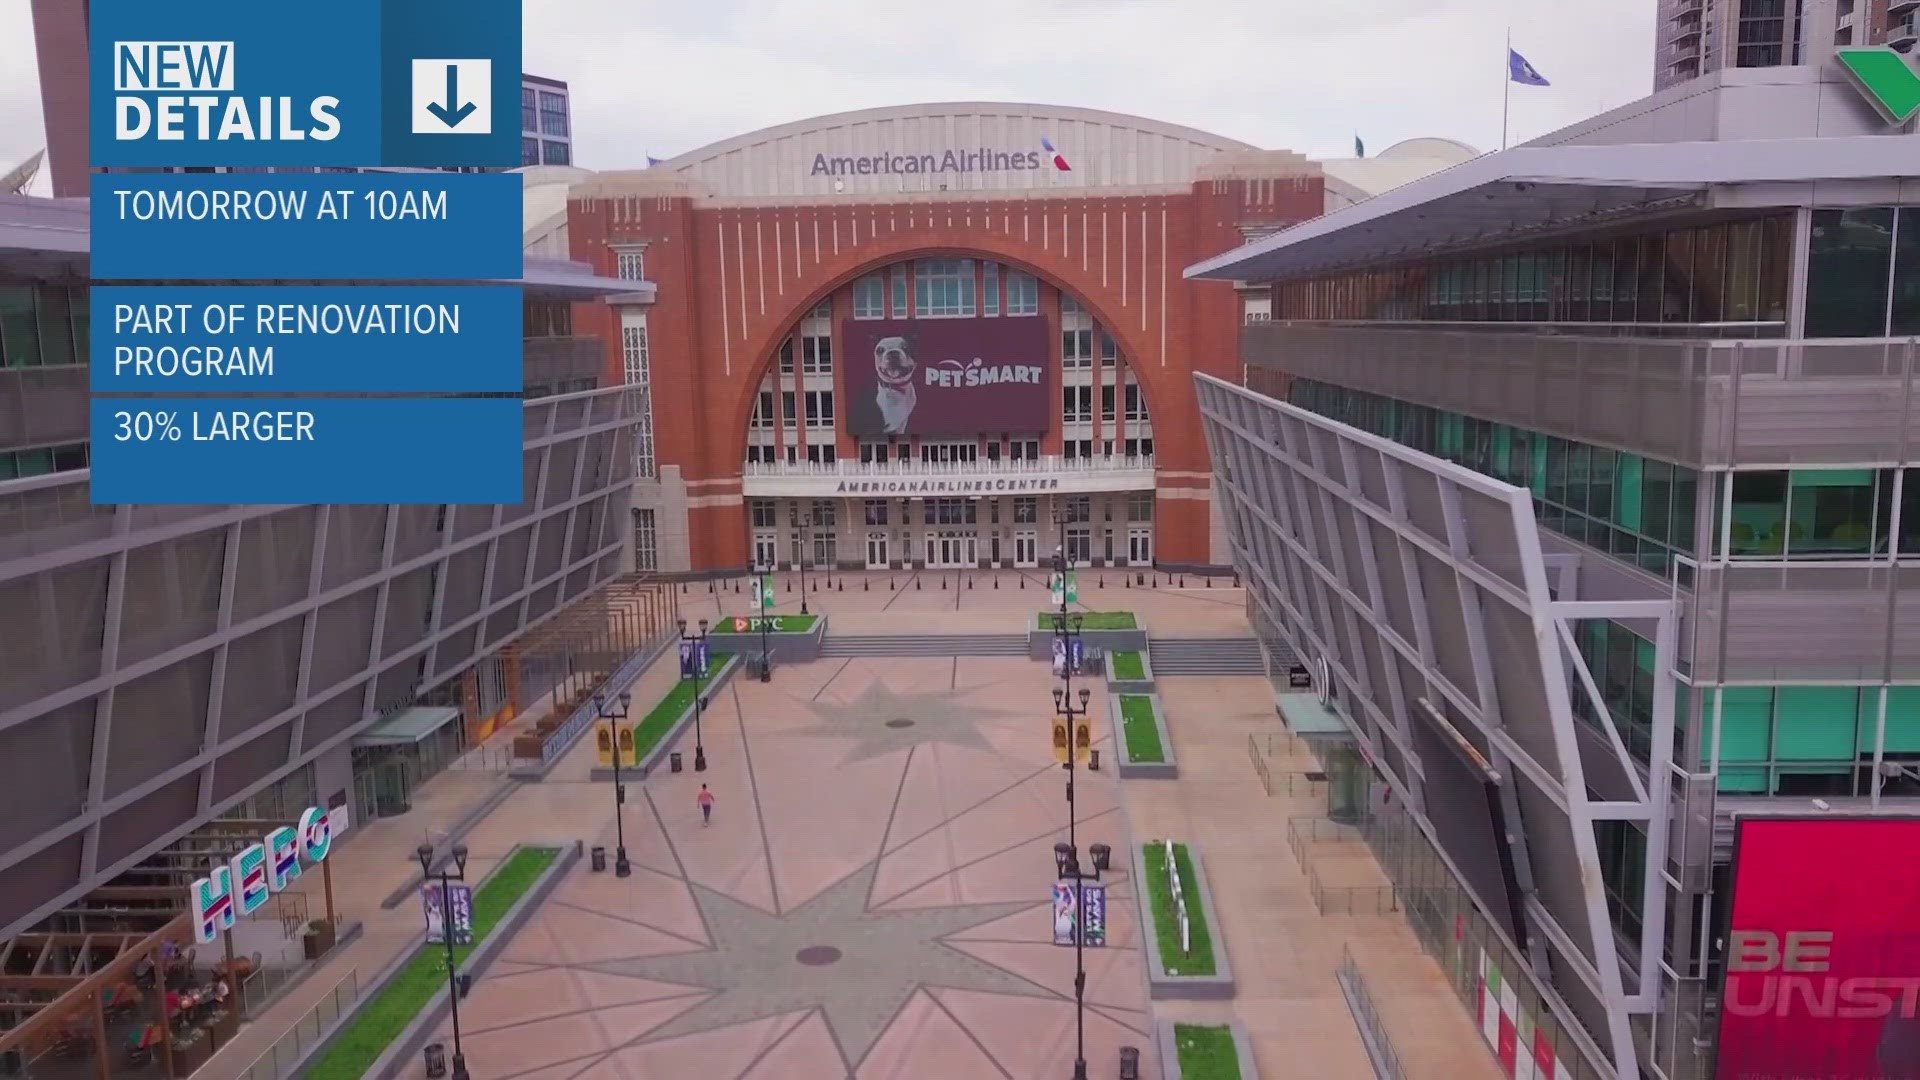 The unveiling comes just before the Dallas Stars and Dallas Mavericks are set to kick off their 2023-2024 seasons at the Downtown Dallas sports arena.